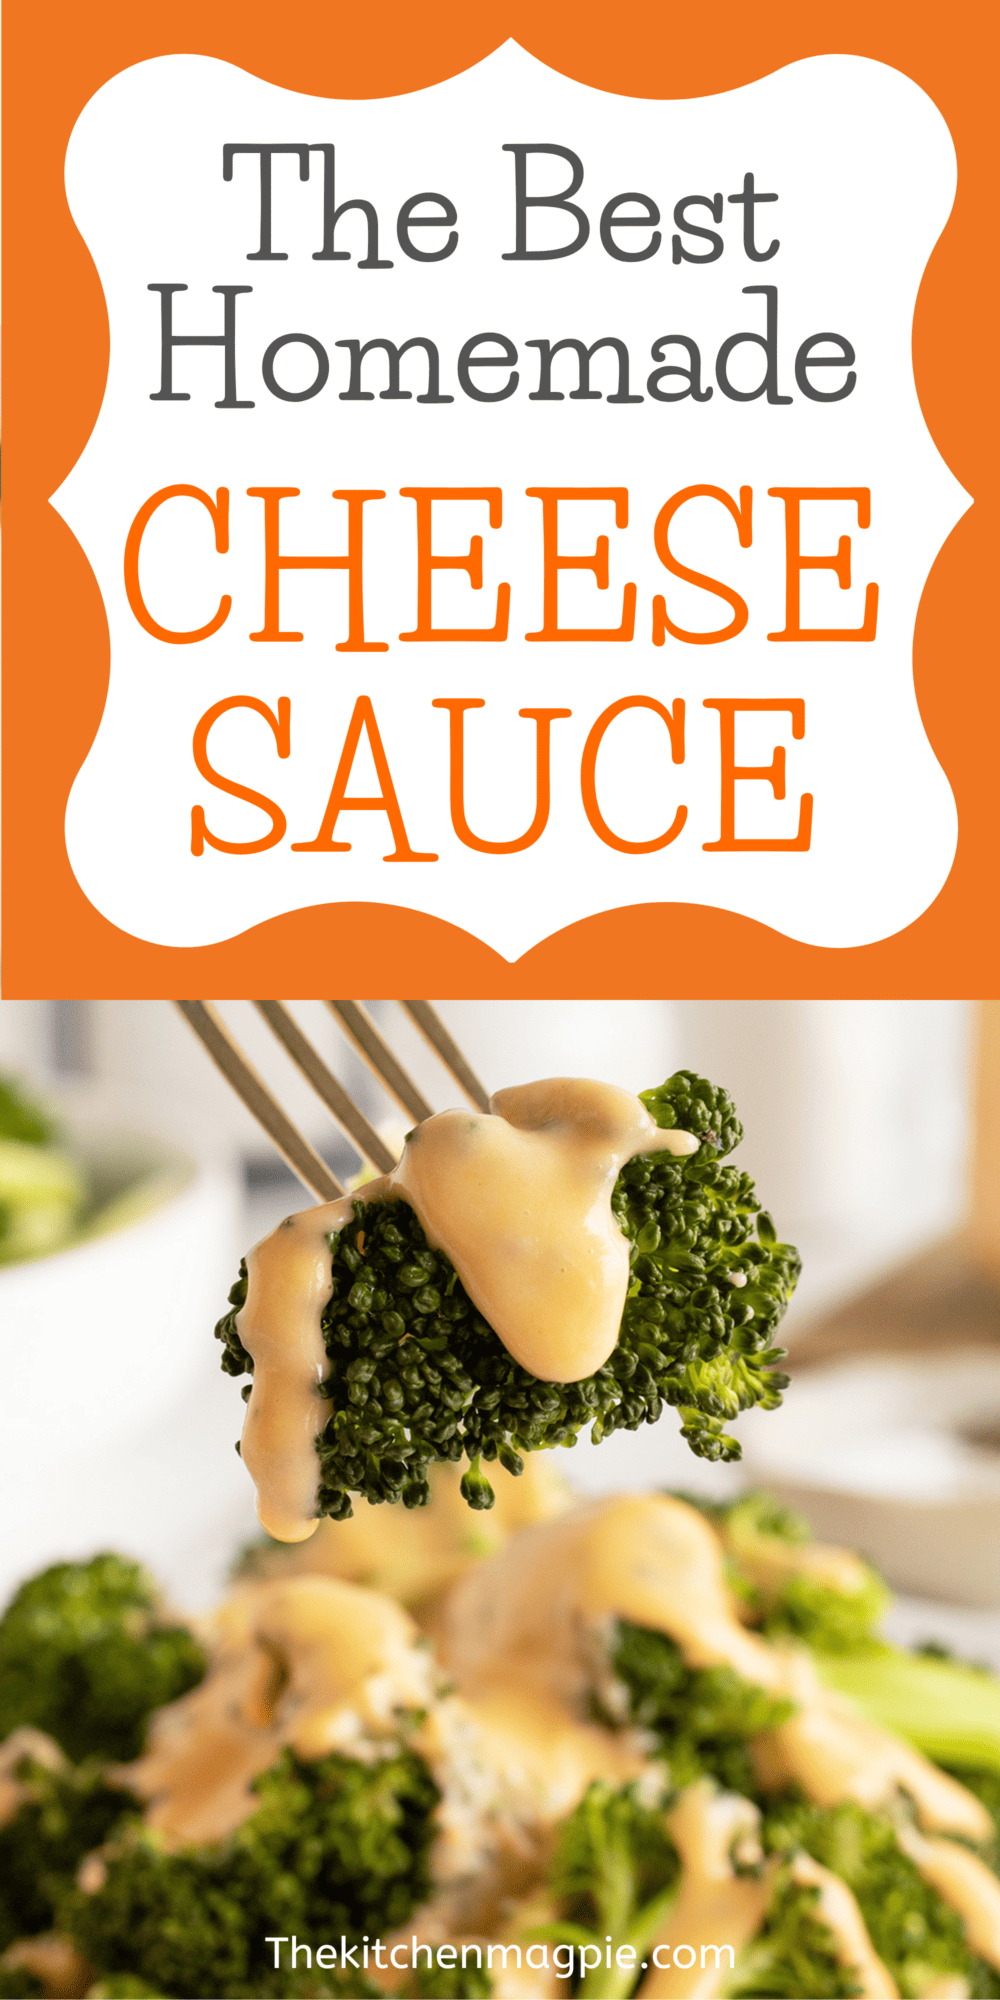 This cheese sauce is great on your favorite roasted vegetables like broccoli, cauliflower or asparagus! 